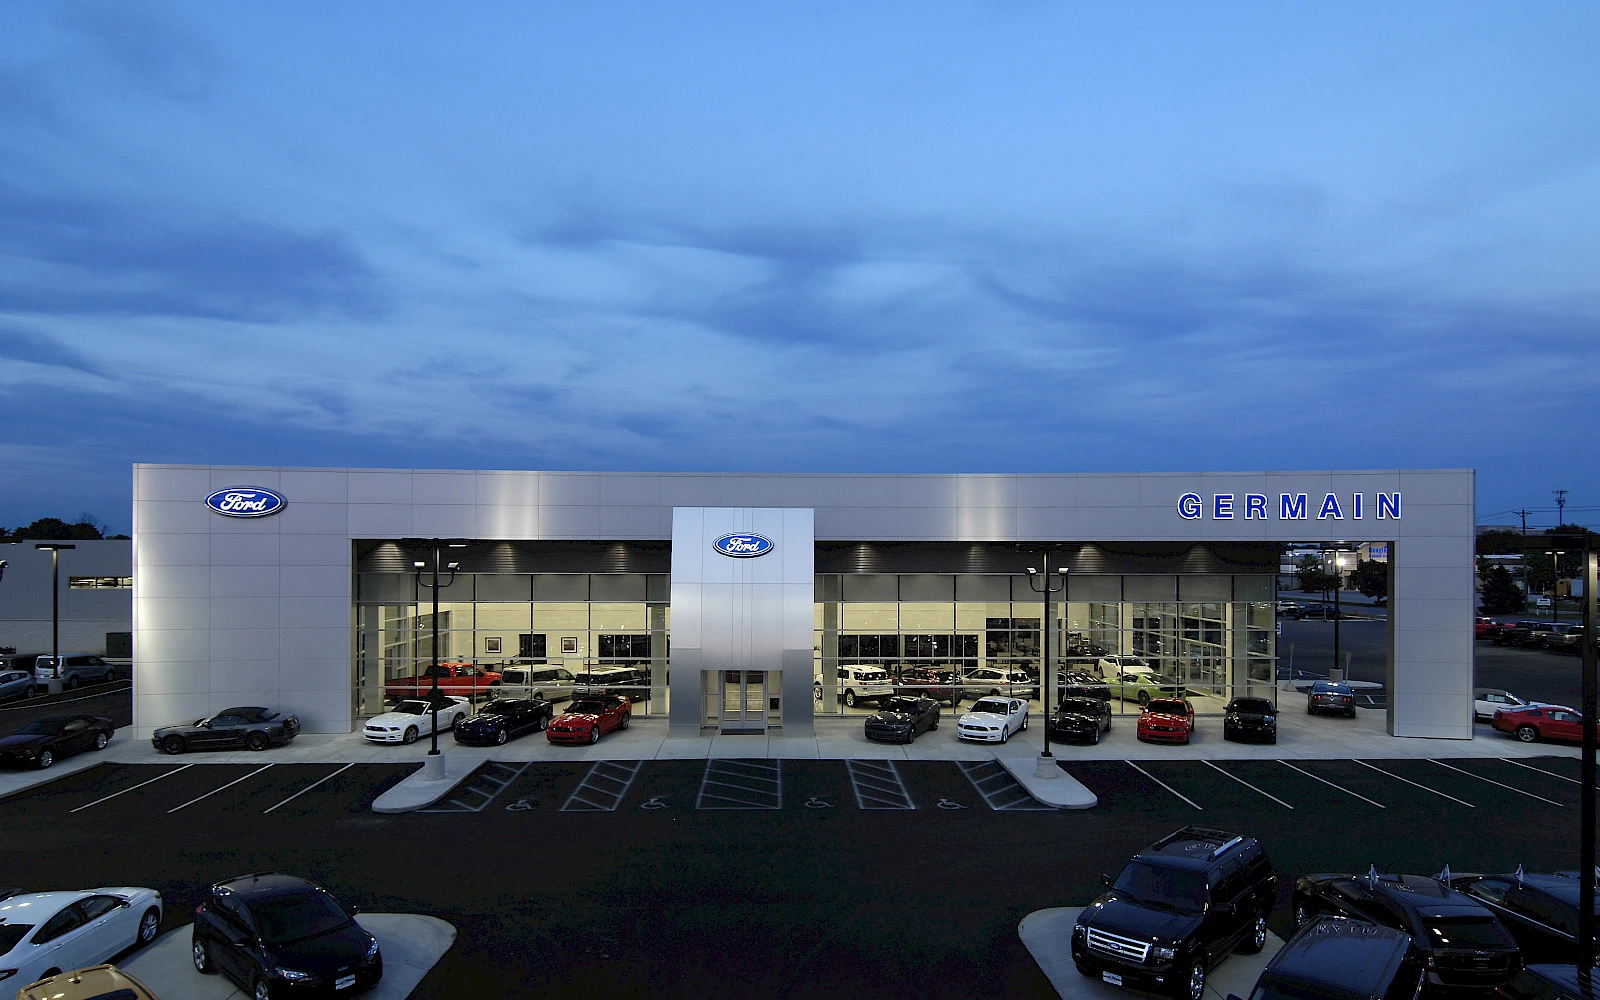 Germain Ford auto dealership construction finished picture 19